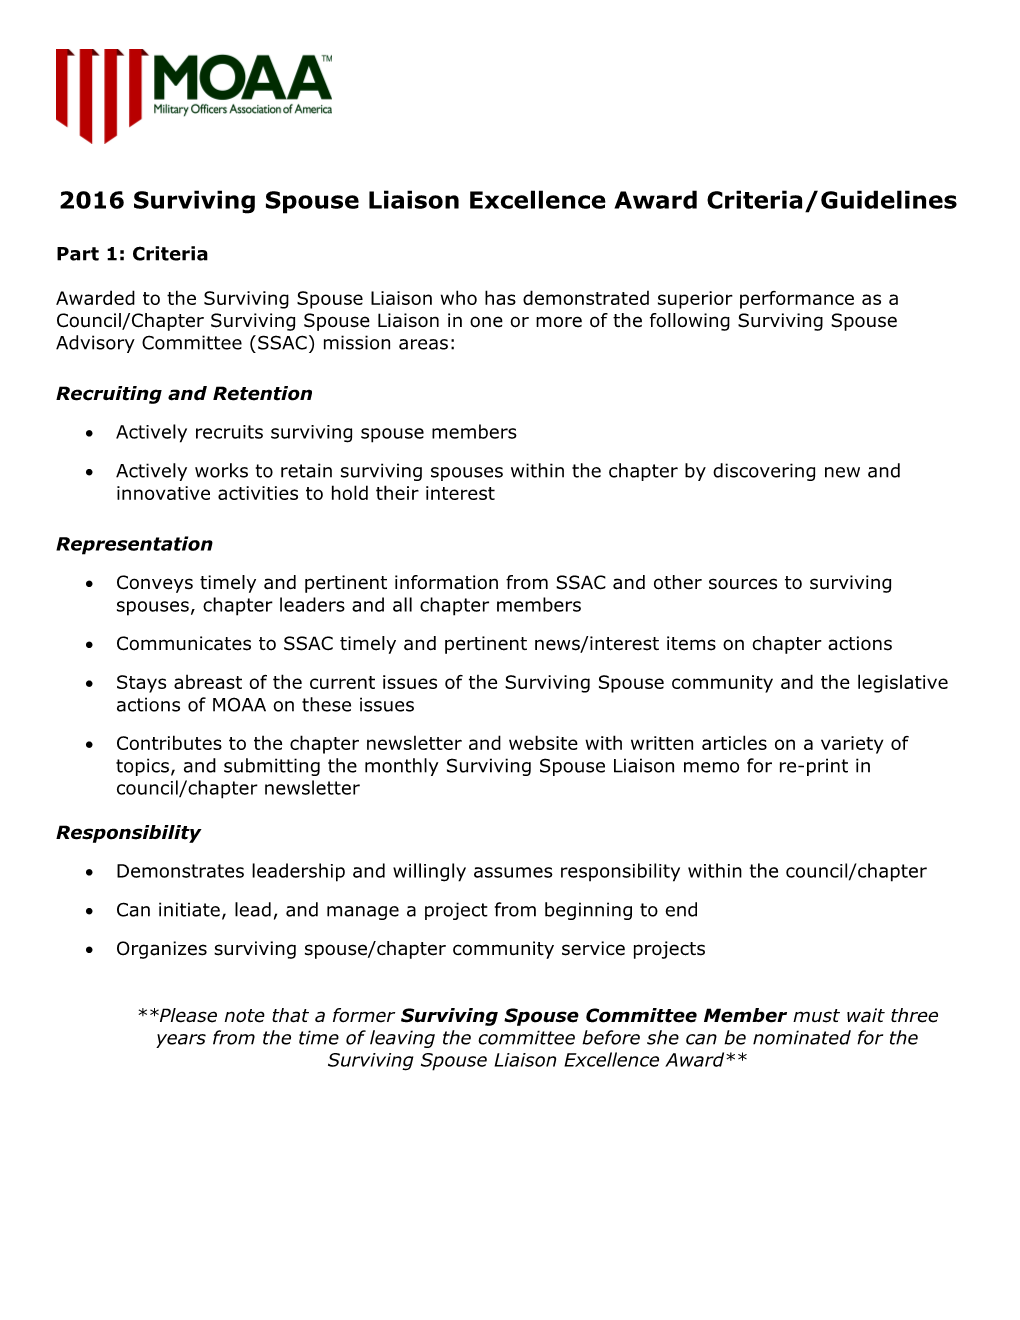 2011 Auxiliary Liaison Excellence Award Criteria/Guidelines and Nomination Form ()